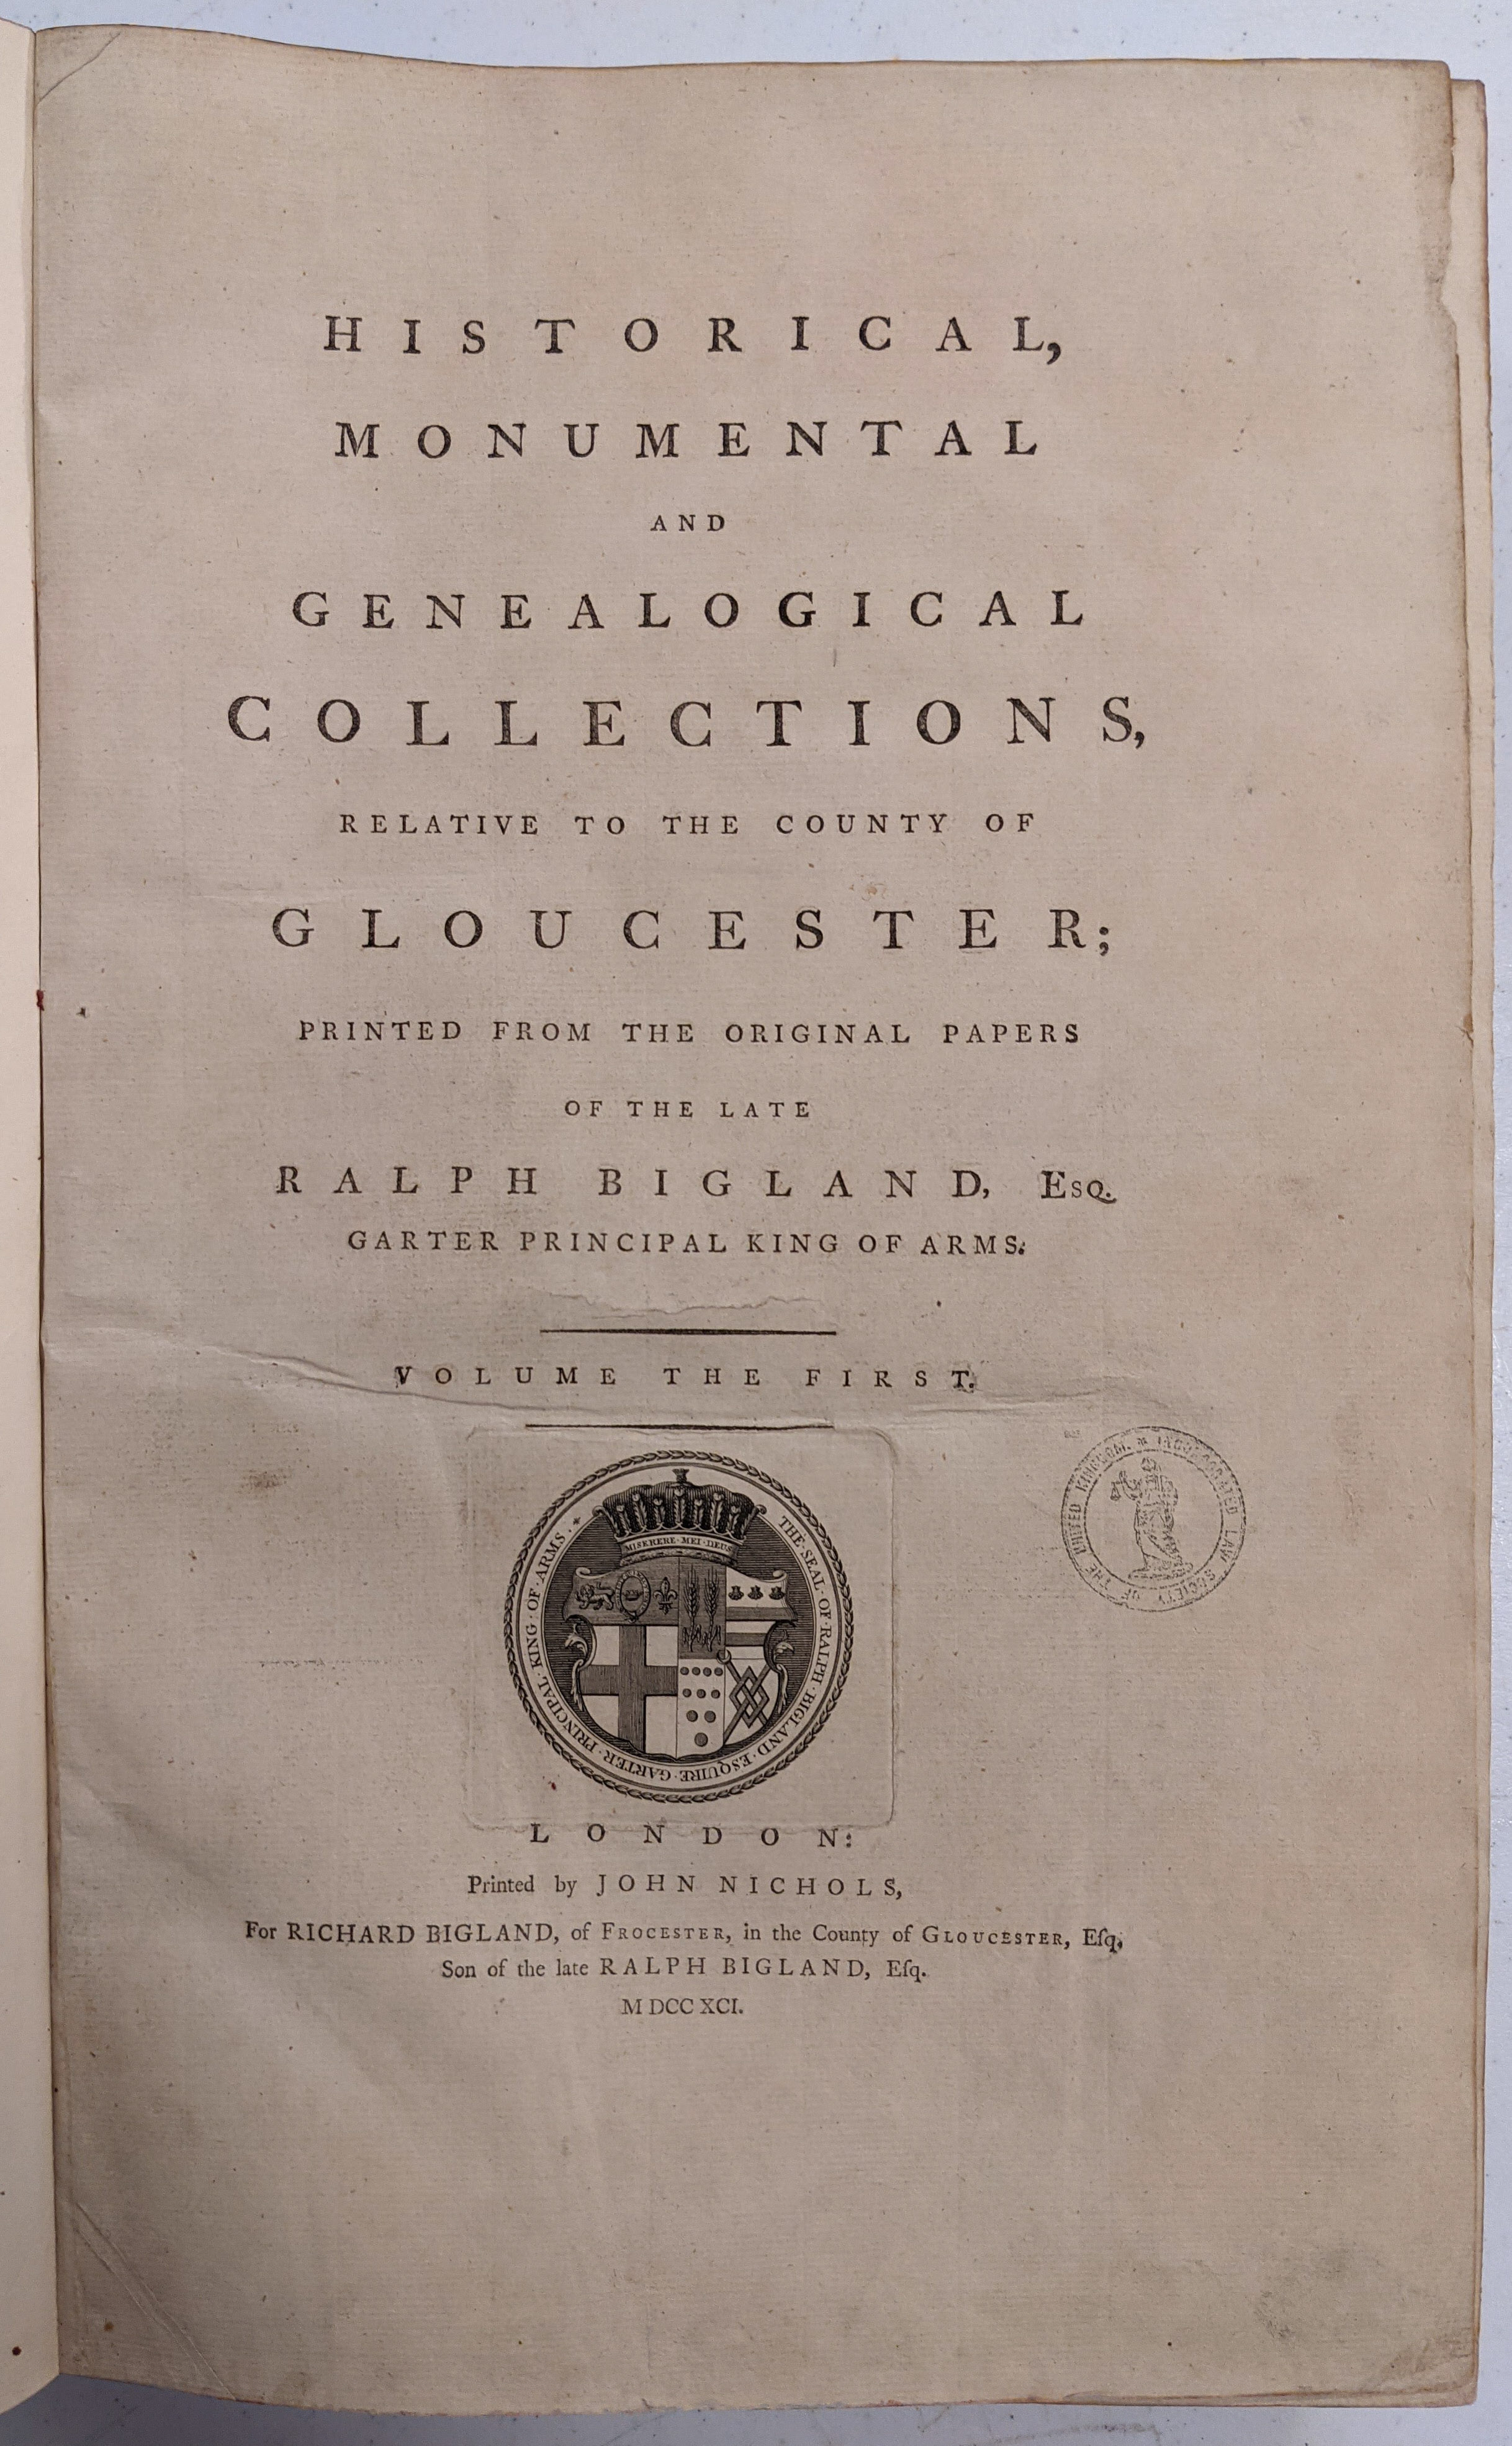 Bigland (Ralph). Historical, Monumental and Genealogical Collections..., 2 vols., 1791-92 - Image 2 of 5